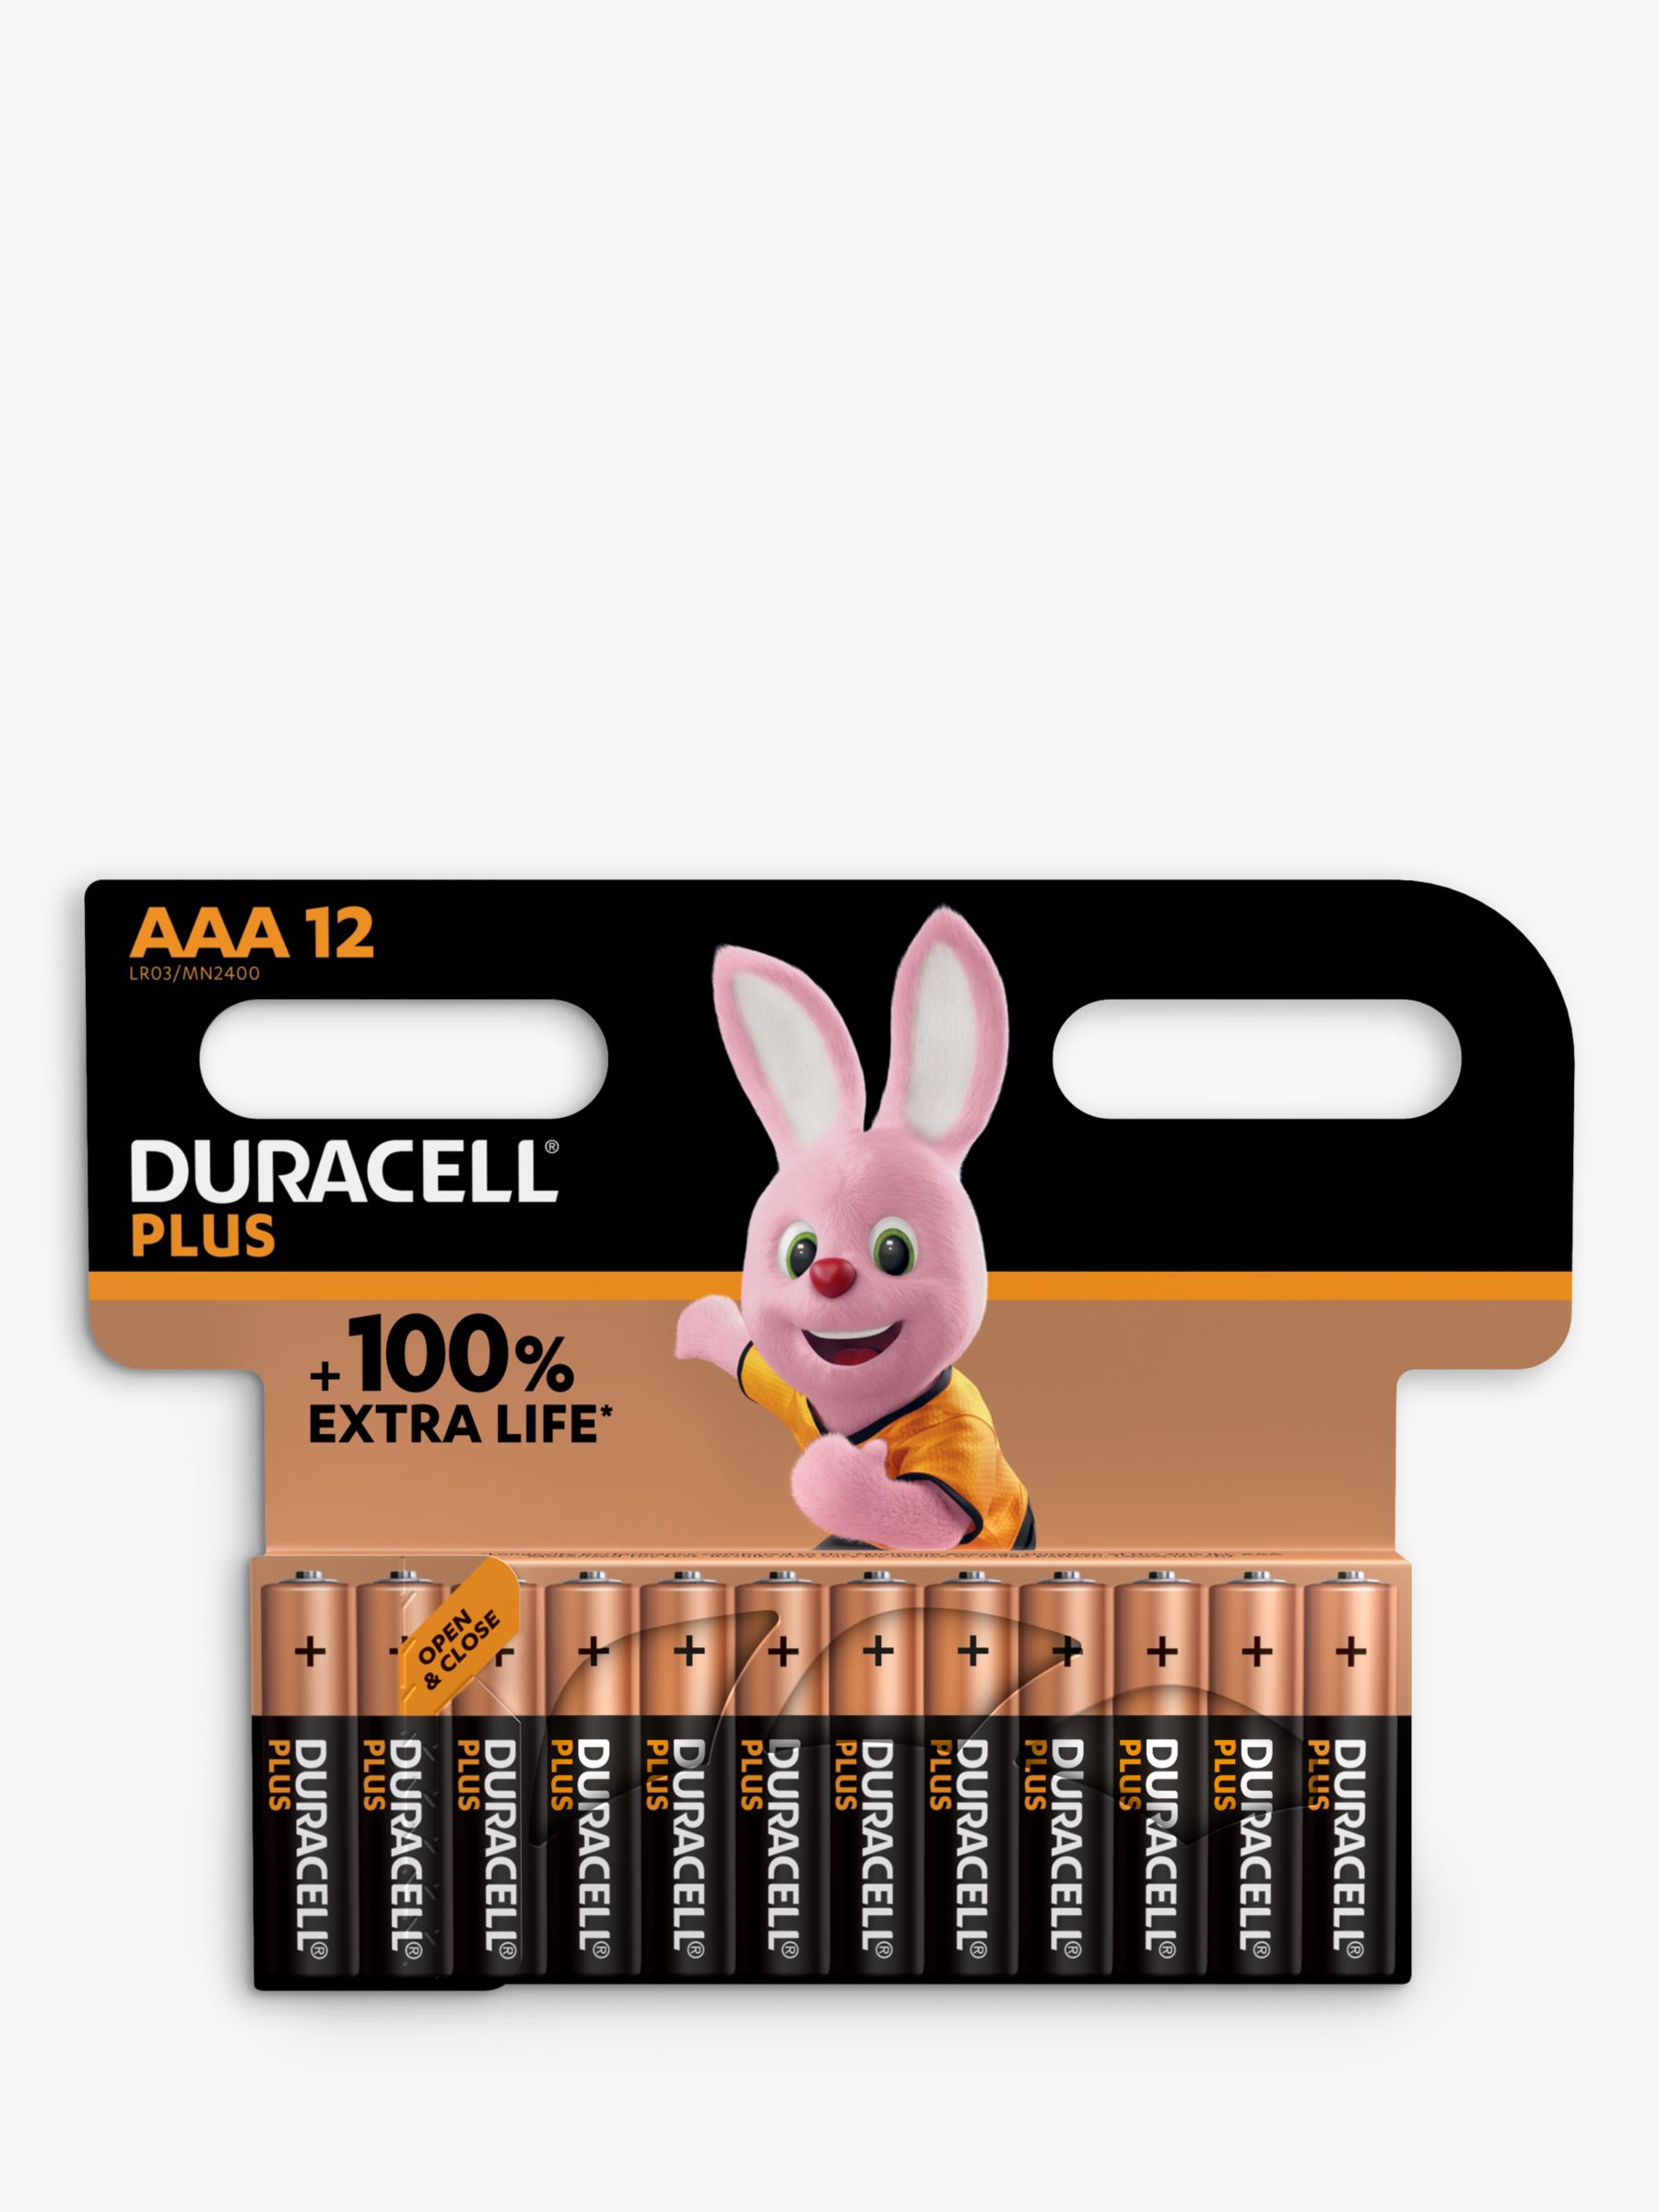 Duracell Recharge Plus AAA Batteries